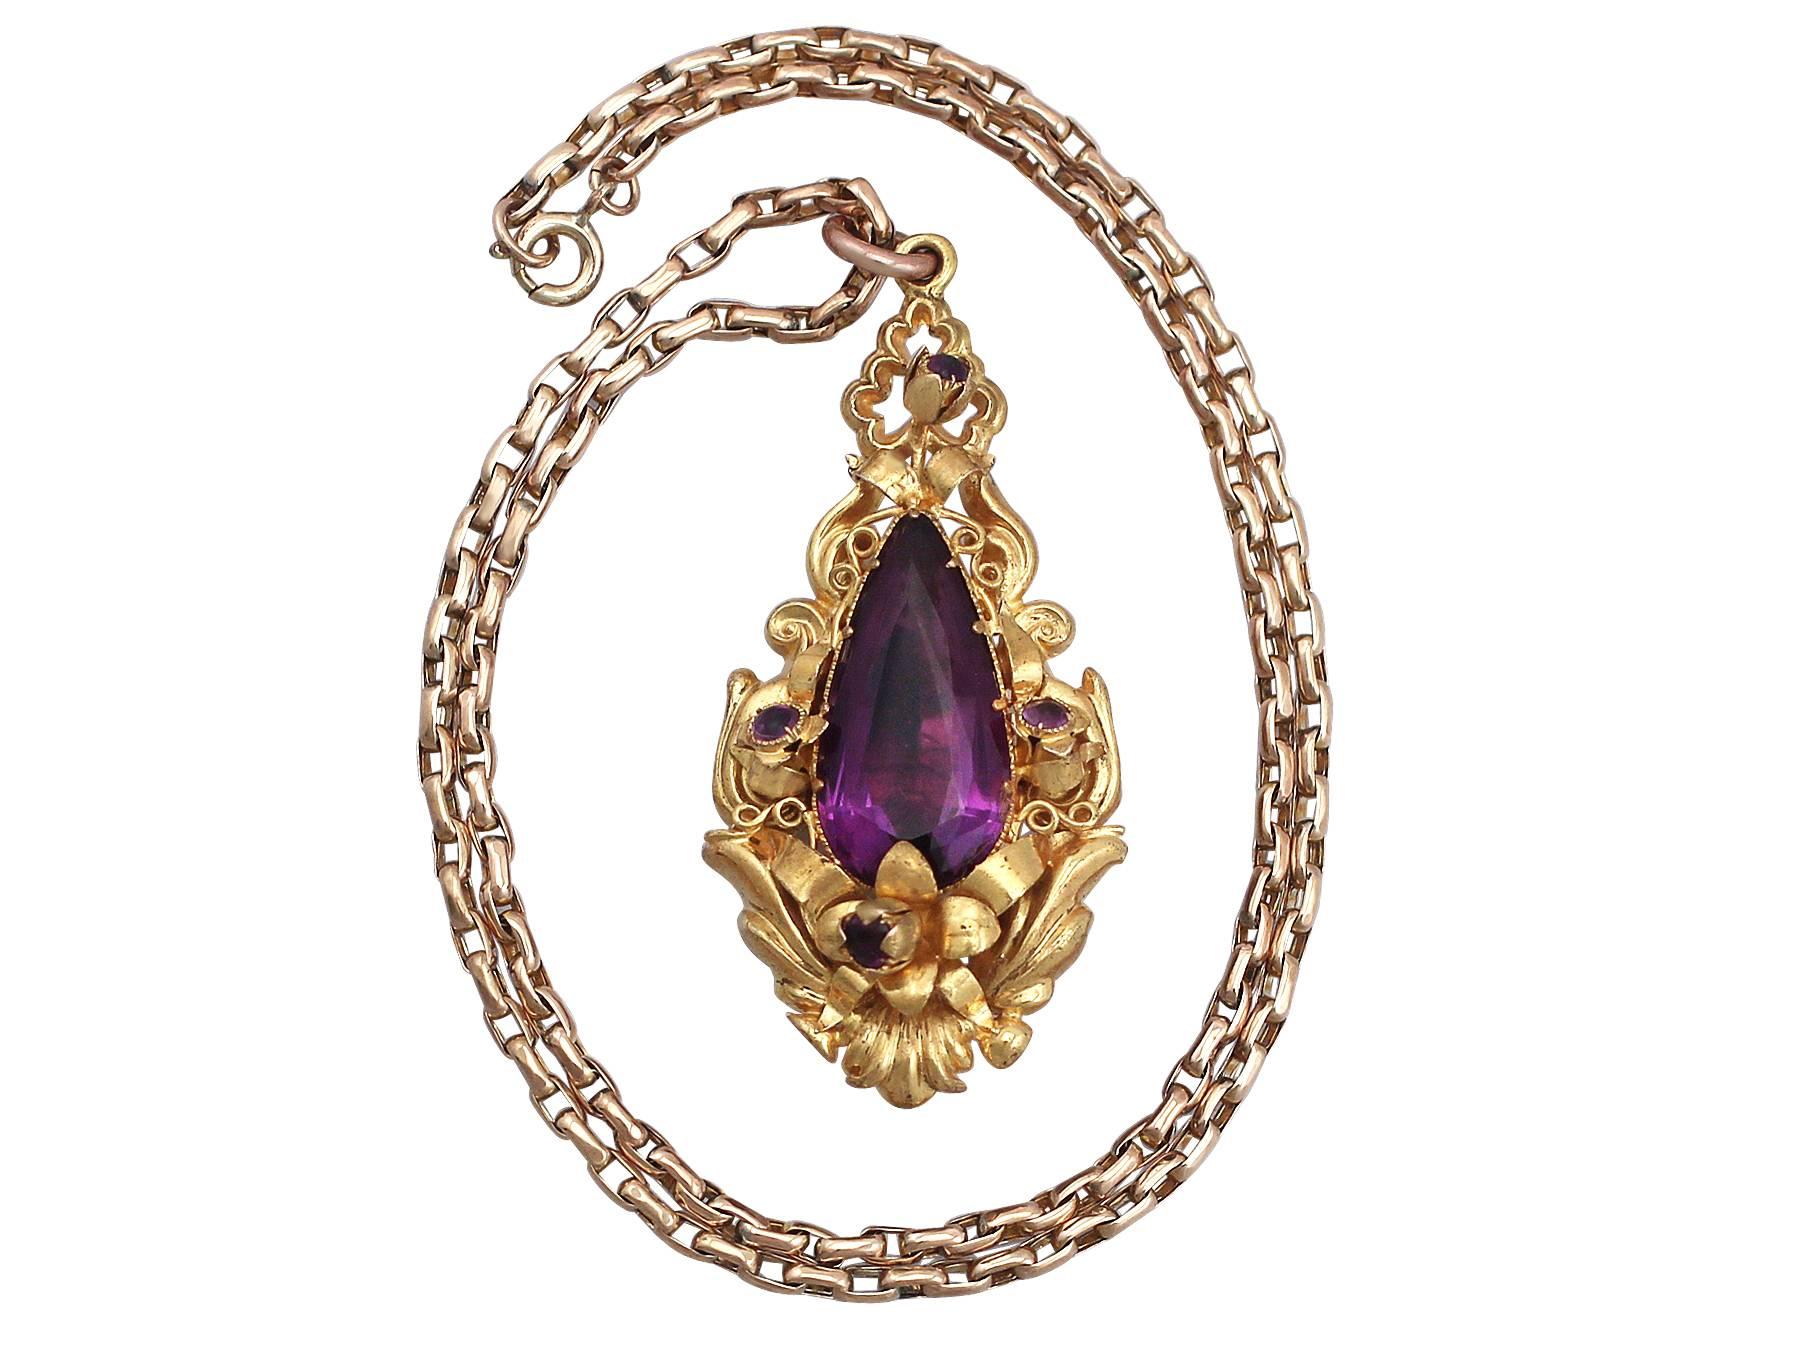 A stunning Victorian 13.30 carat amethyst and 21 carat yellow gold pendant with a 9 carat yellow gold belcher chain; part of our diverse antique jewellery collections.

This exceptional, fine and impressive Victorian amethyst pendant has been